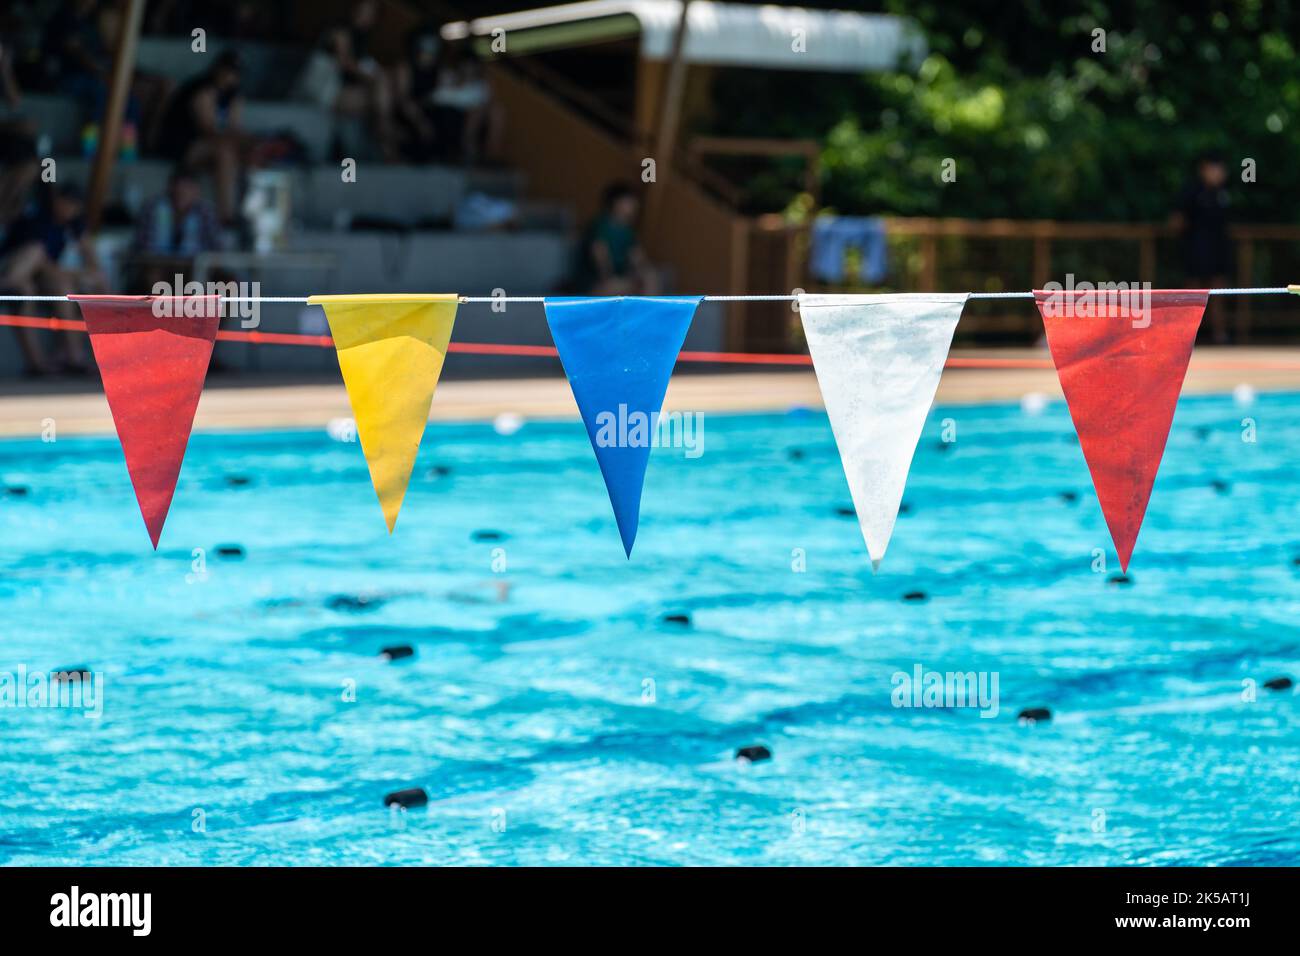 Multicolored triangle swim marker flags hanging above a swimming pool